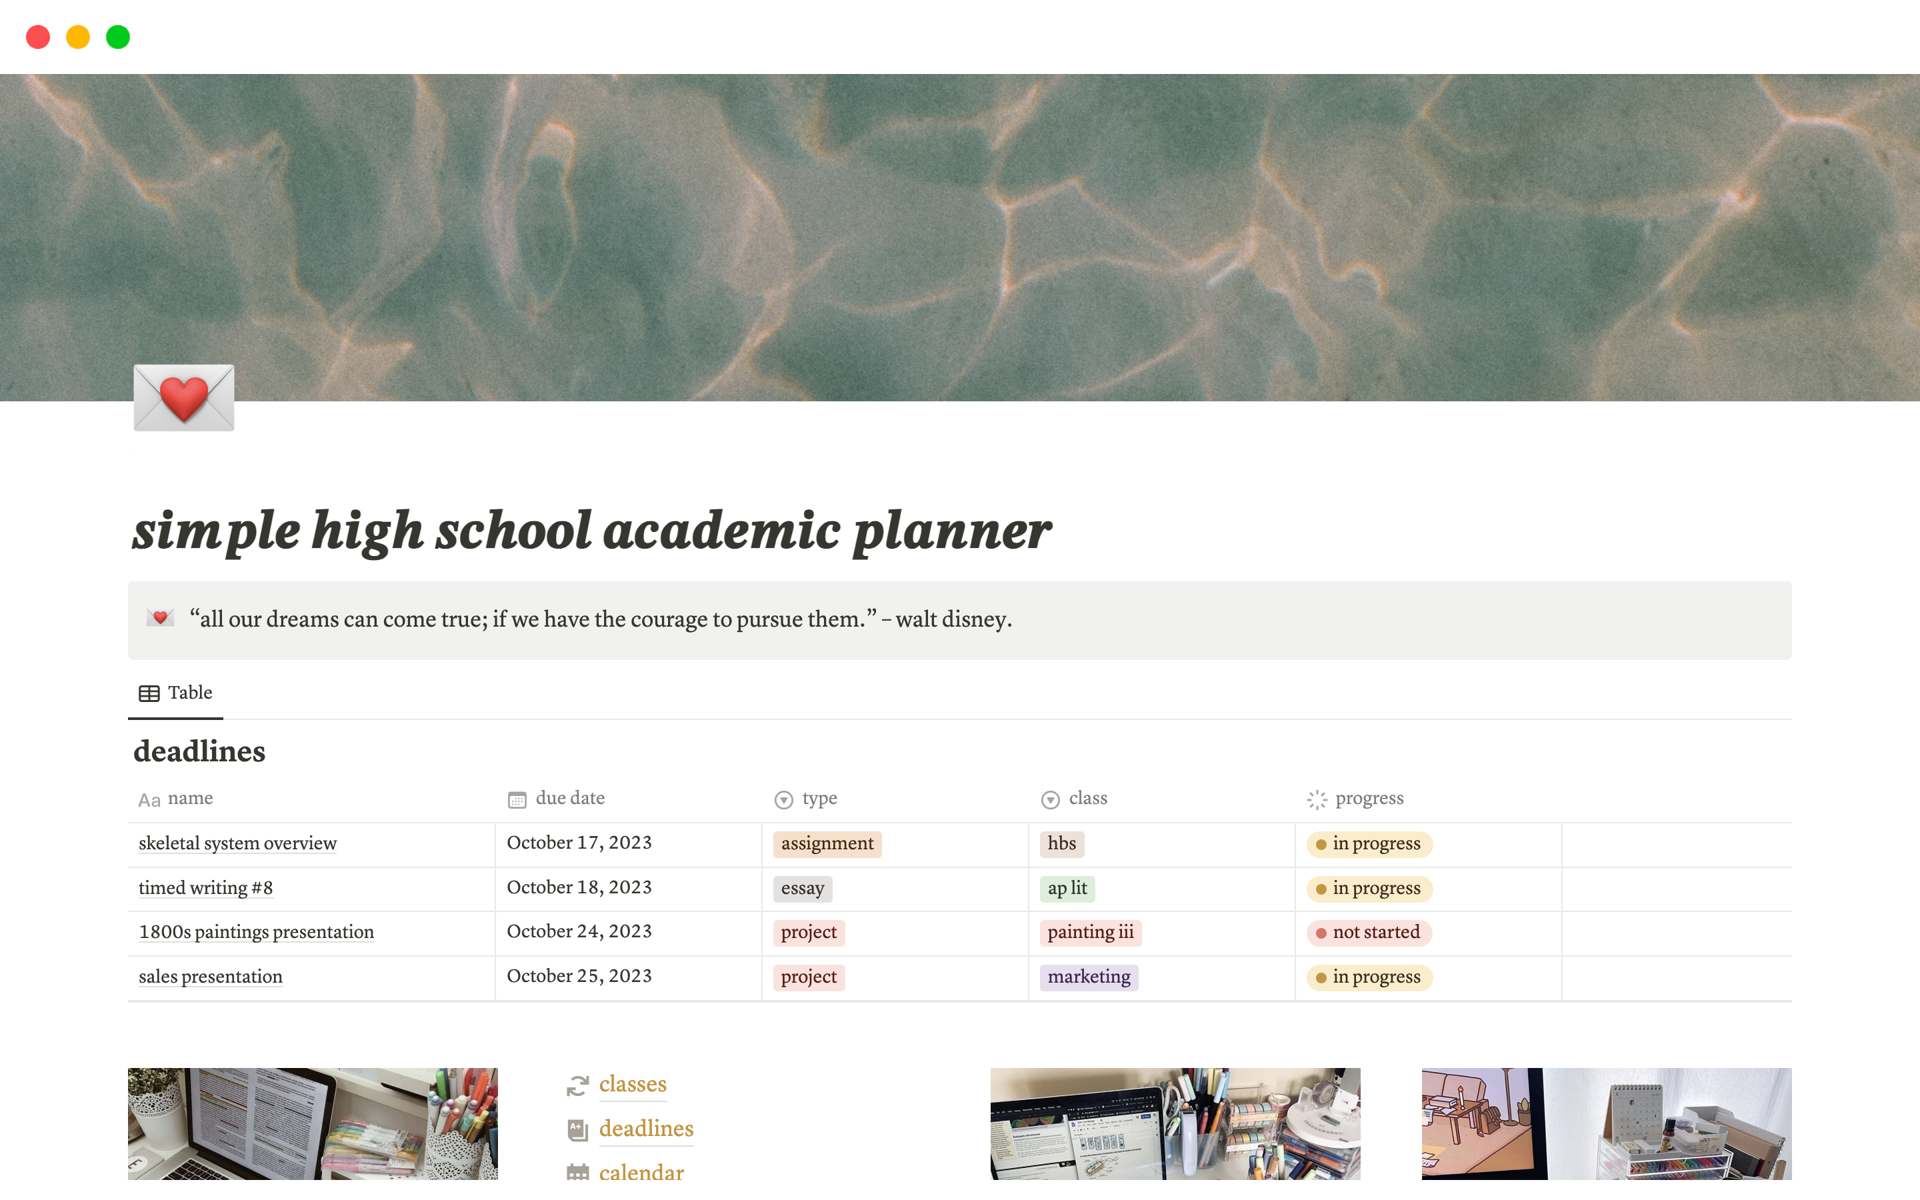 this planner is perfect for any high school student to keep track of their academic life !!